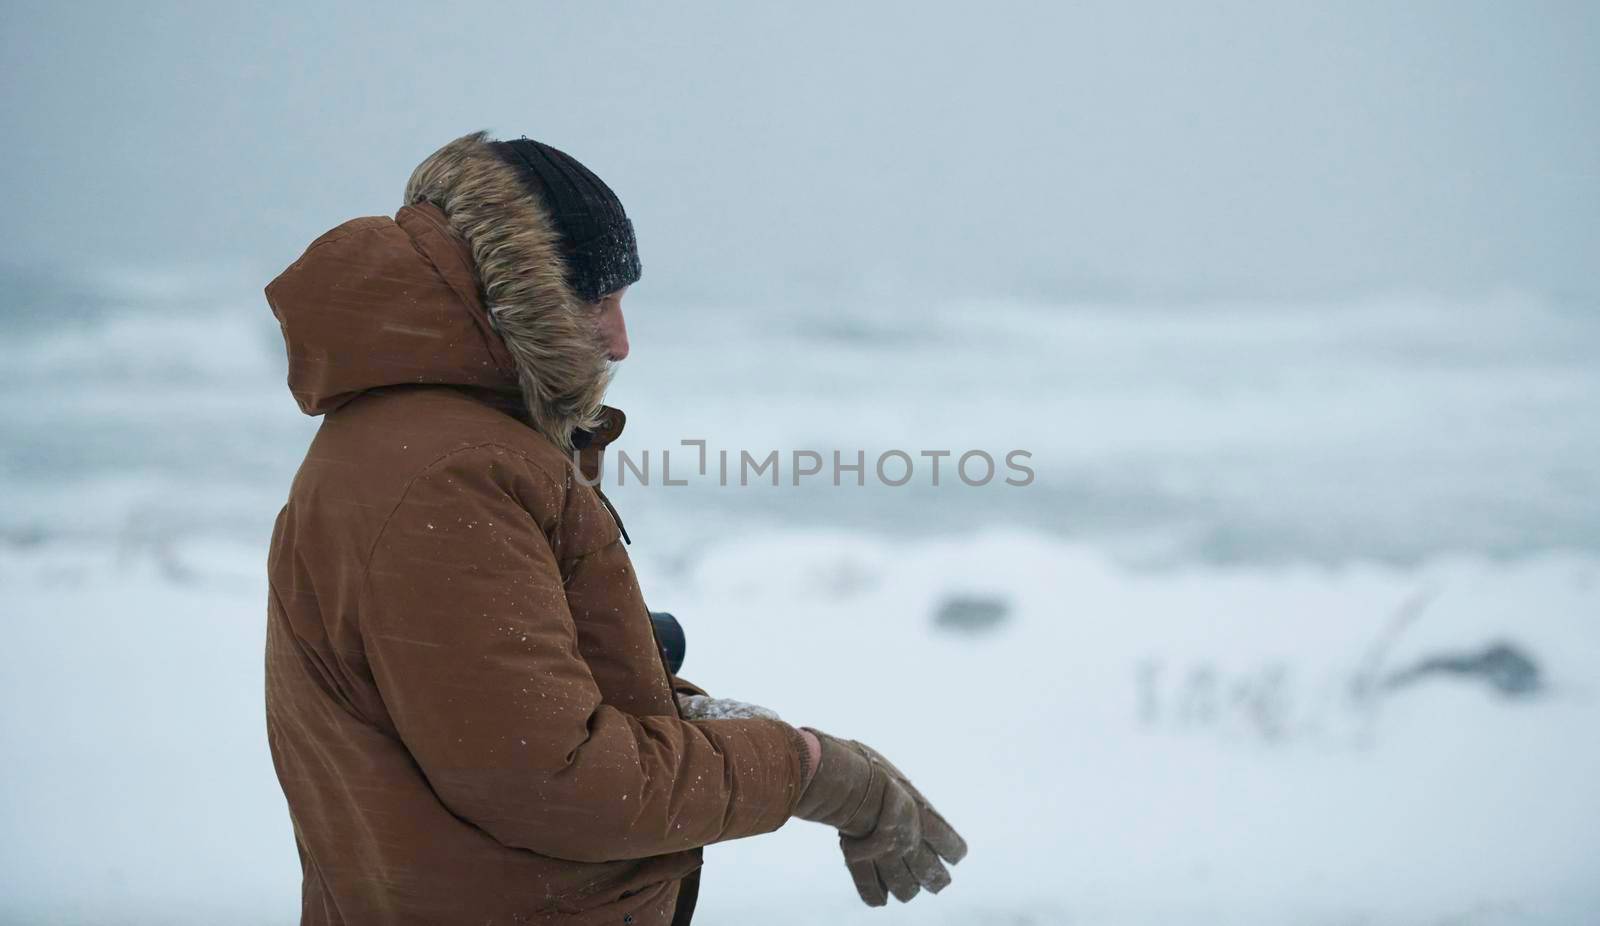 portrait local authentic eskimo  man at winter in stormy weather wearing warm  fur jacket